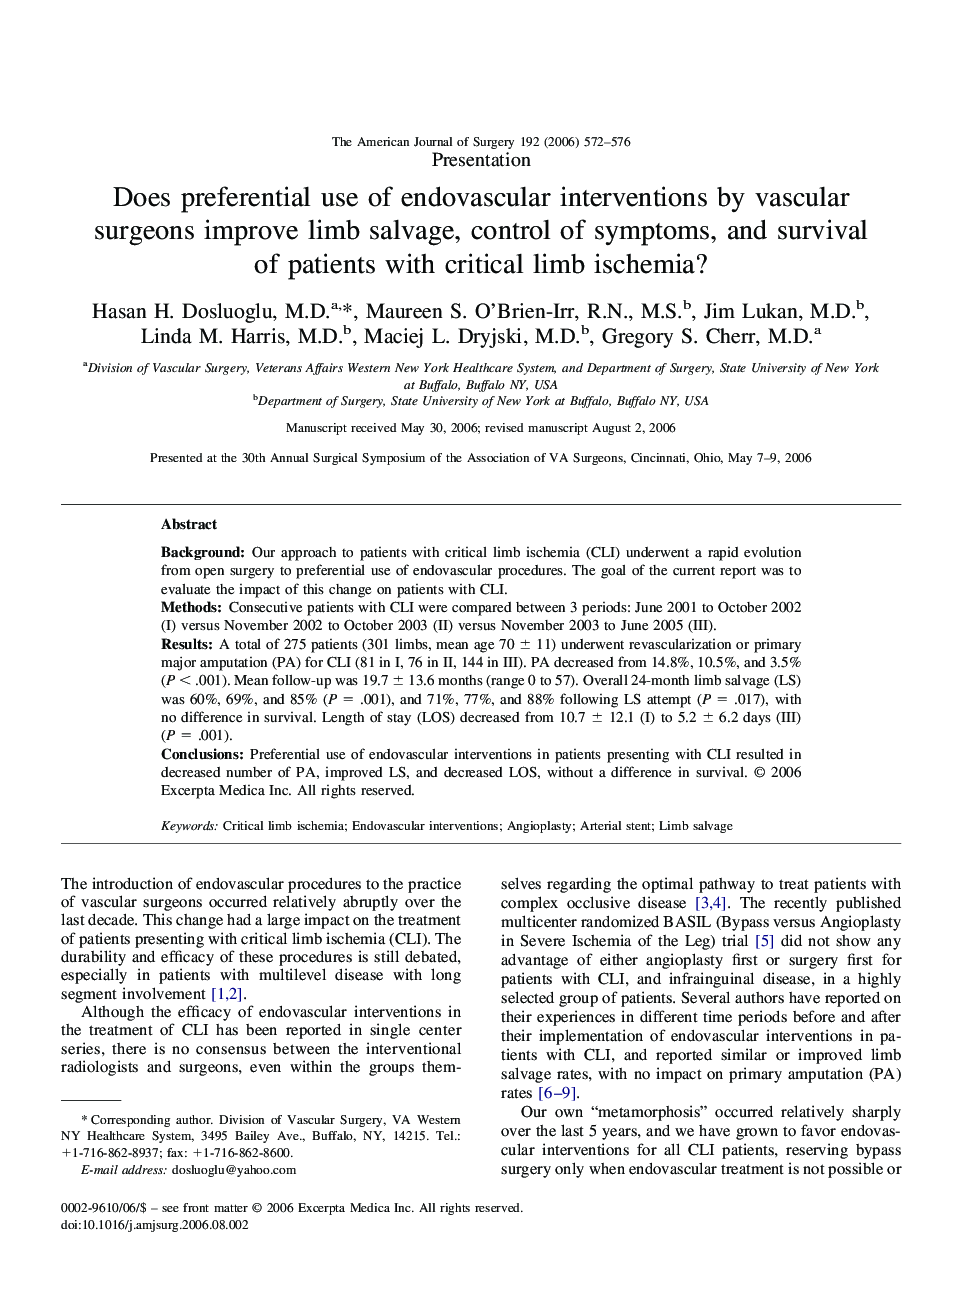 Does preferential use of endovascular interventions by vascular surgeons improve limb salvage, control of symptoms, and survival of patients with critical limb ischemia?